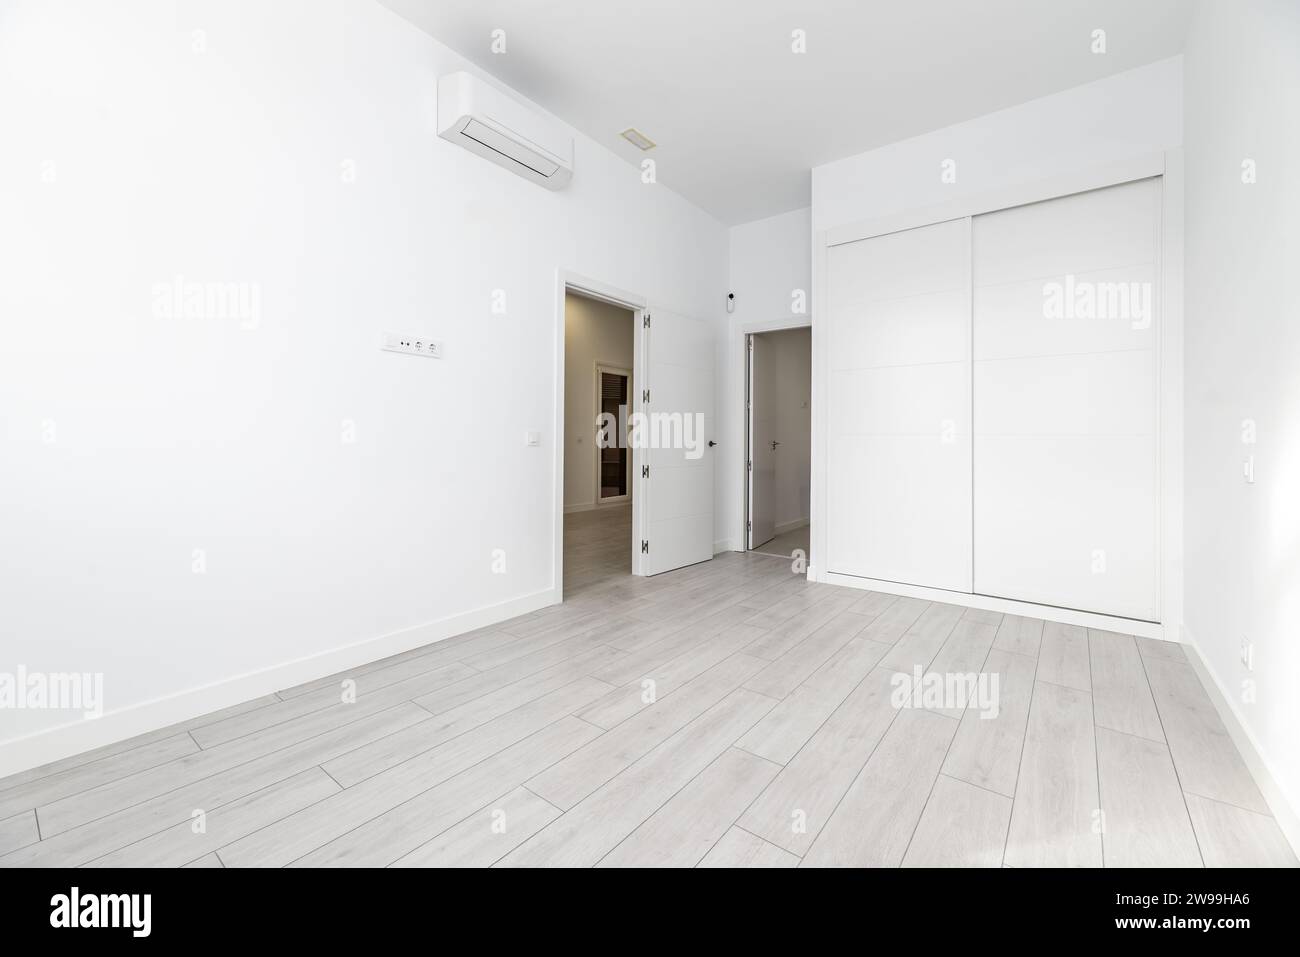 An empty room with built-in wardrobes with white sliding doors, access to an en-suite bathroom and air conditioning units hanging high on the wall Stock Photo